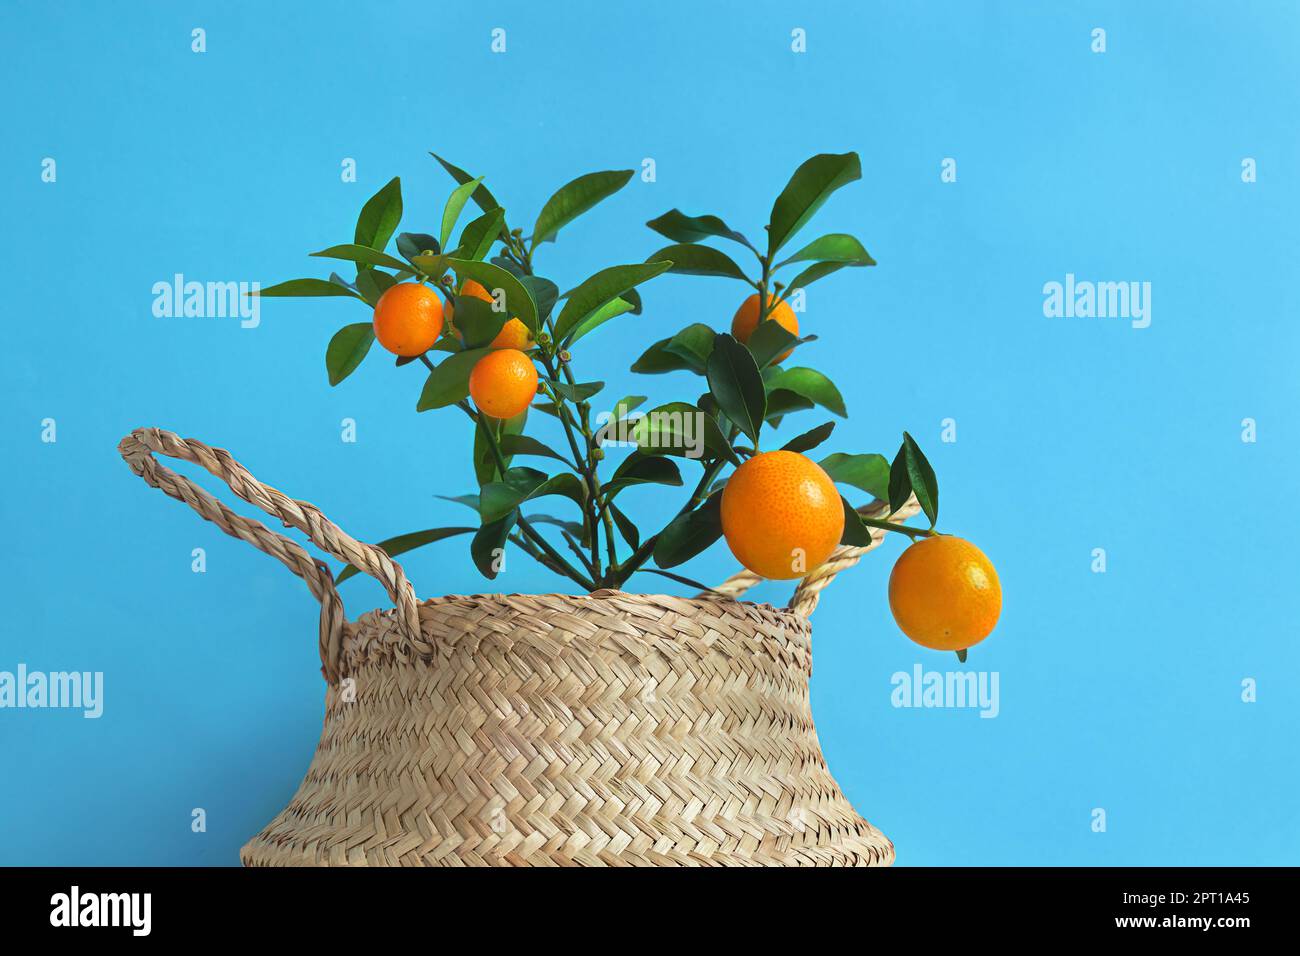 Young tangerine or kumquat tree with fruits in a wicker pot on a blue background close-up Stock Photo